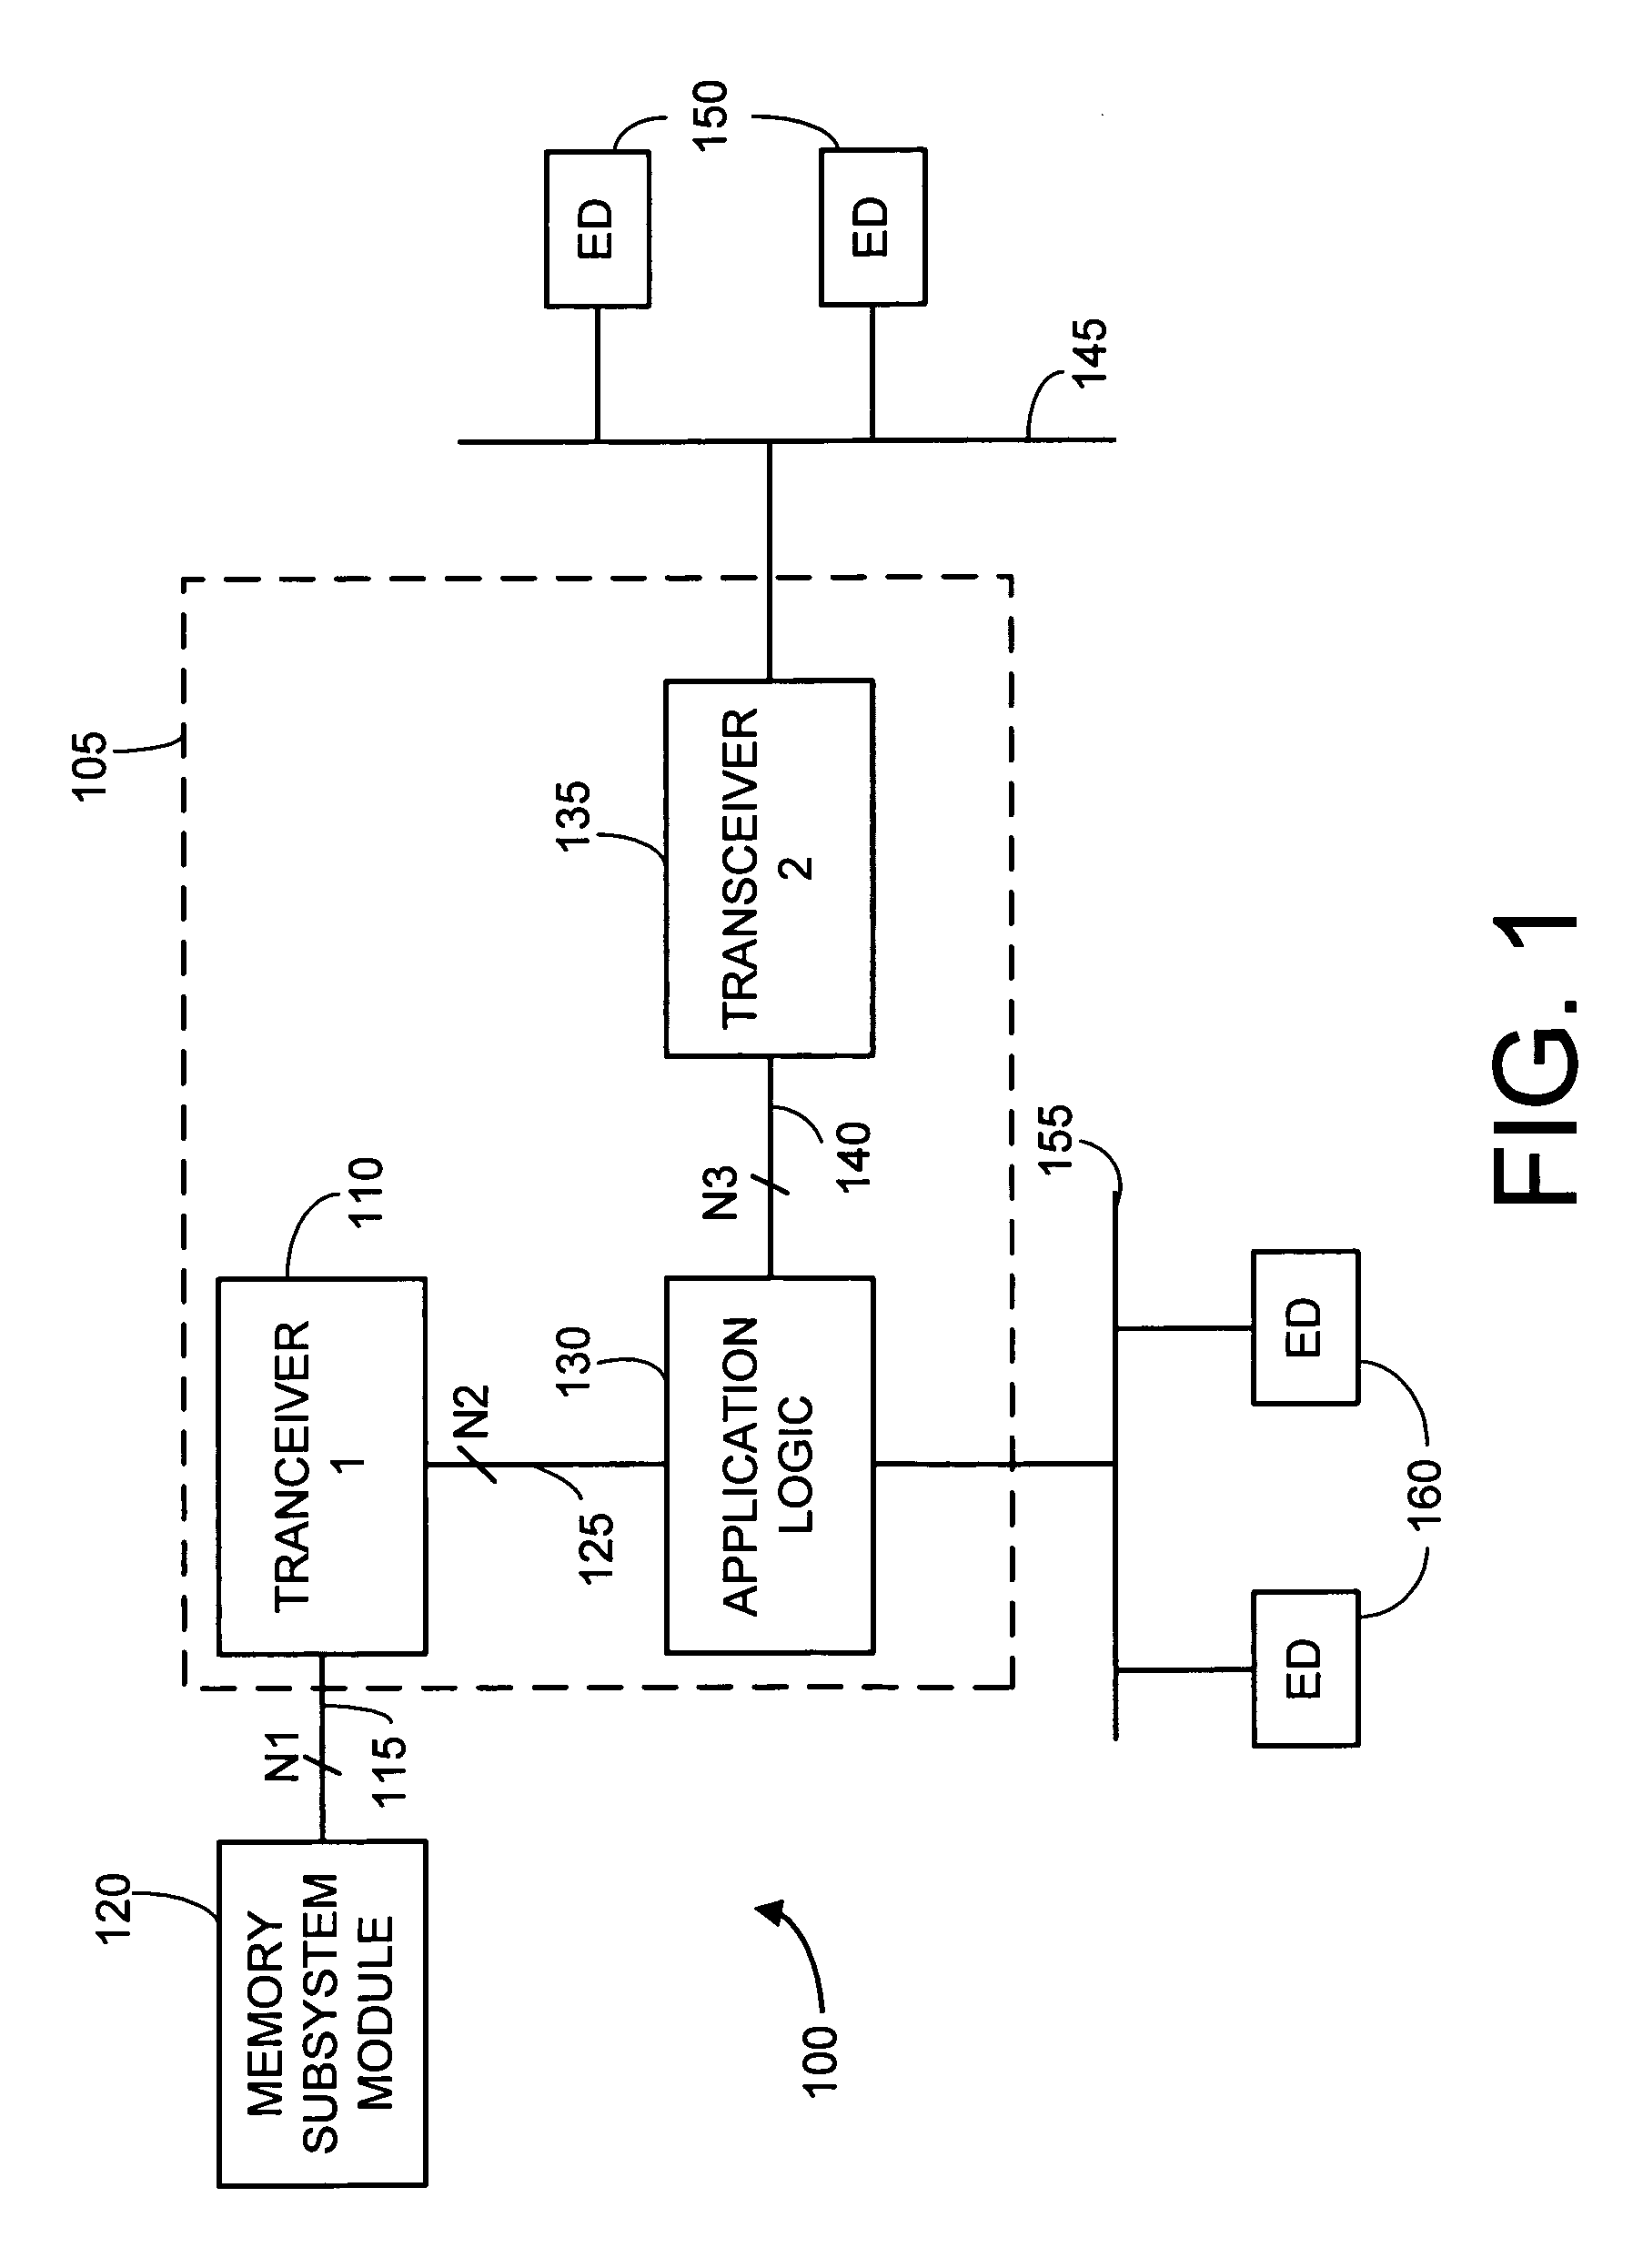 High-speed adaptive interconnect architecture with nonlinear error functions